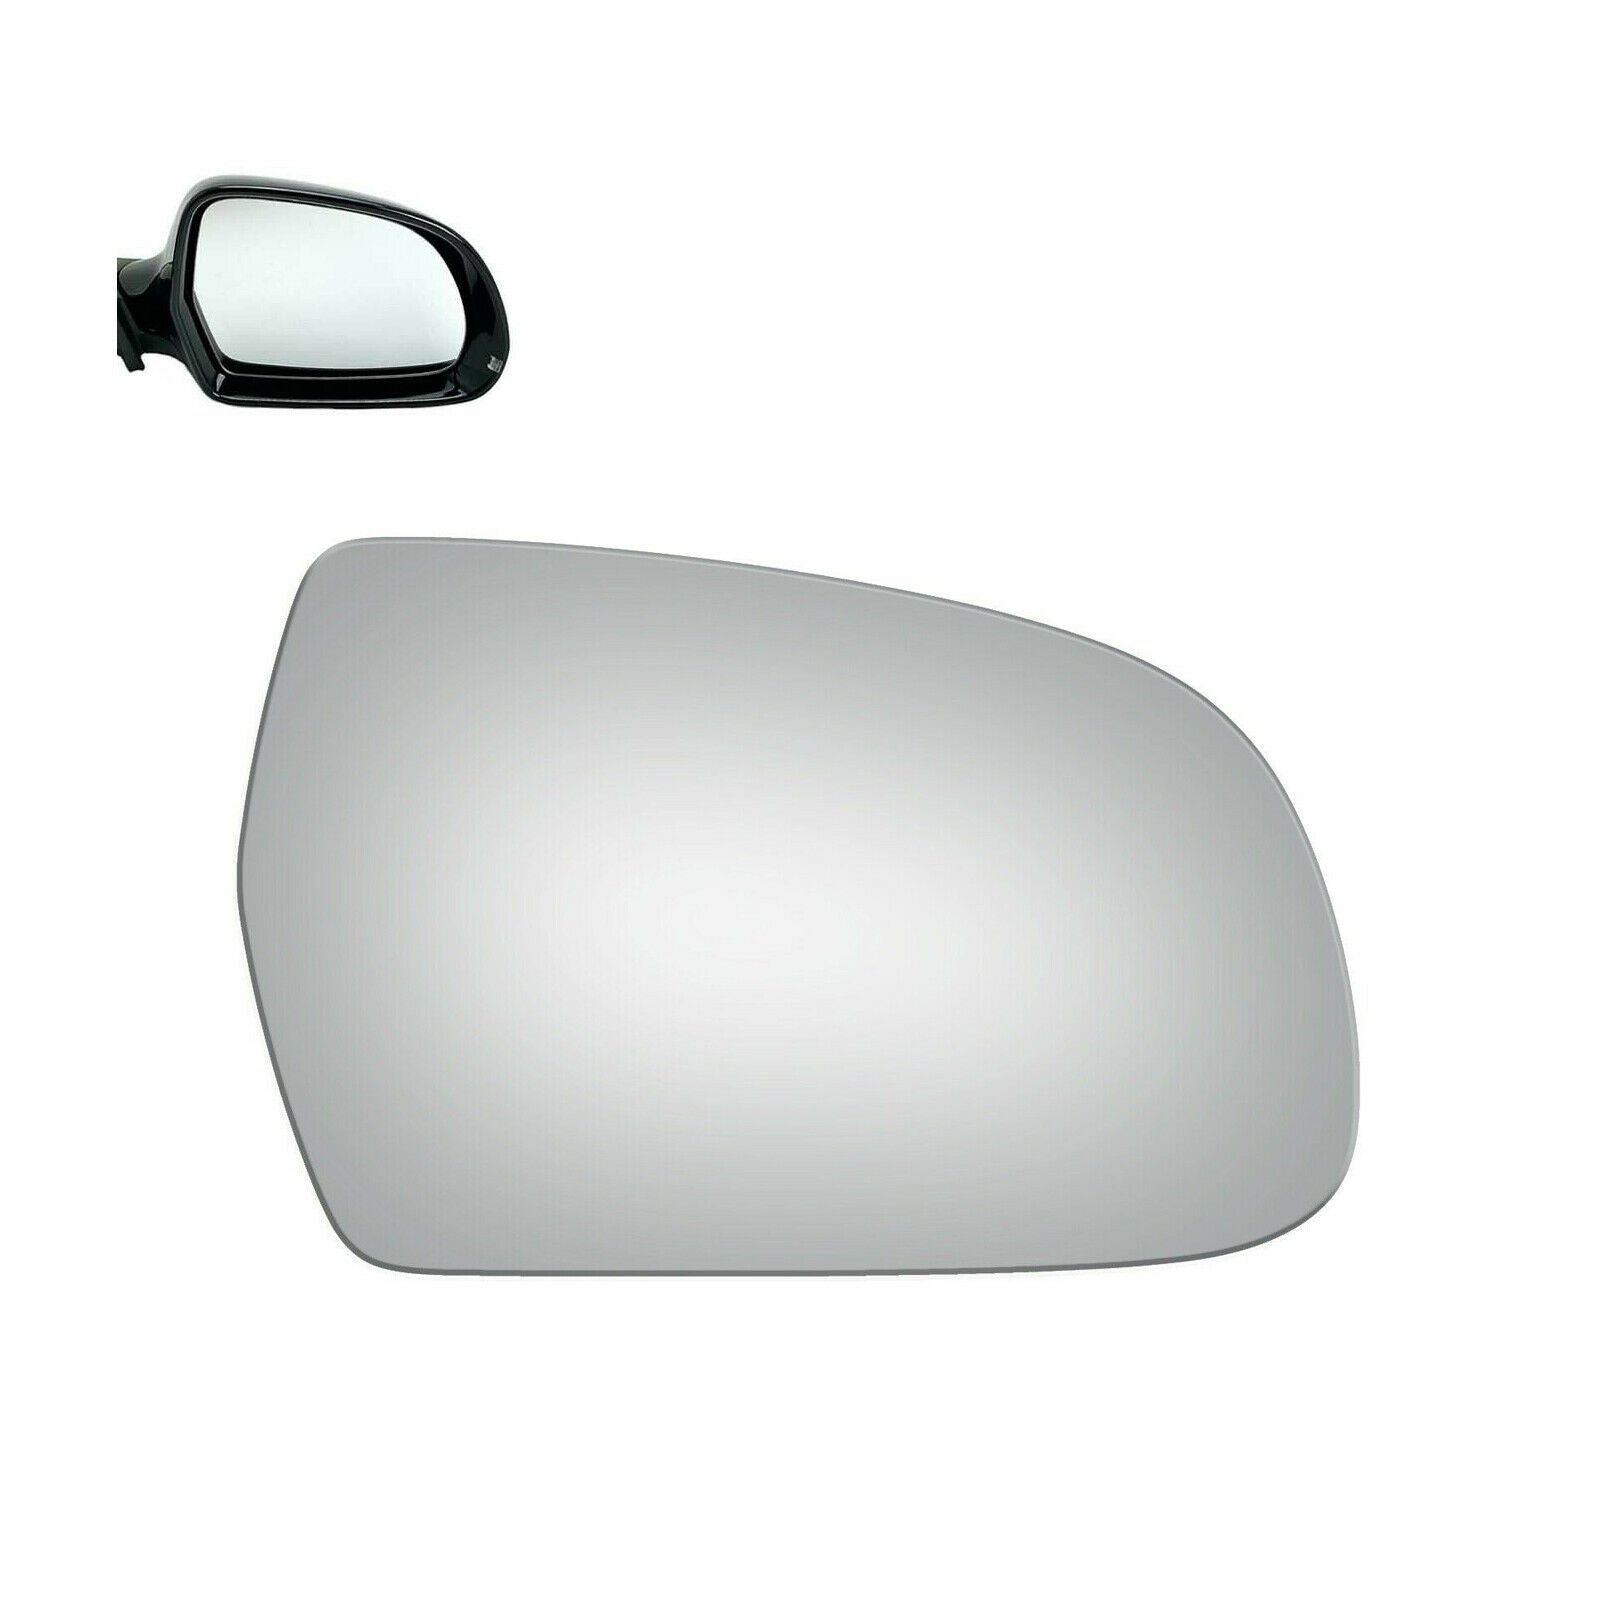 WLLW Replacement Mirror Glass for AUDI 2010-2017 A3/A4/A5 QUATTRO S4/S5/RS5, Driver Left Side LH/Passenger Right Side RH/The Both Sides Flat Convex M-0066